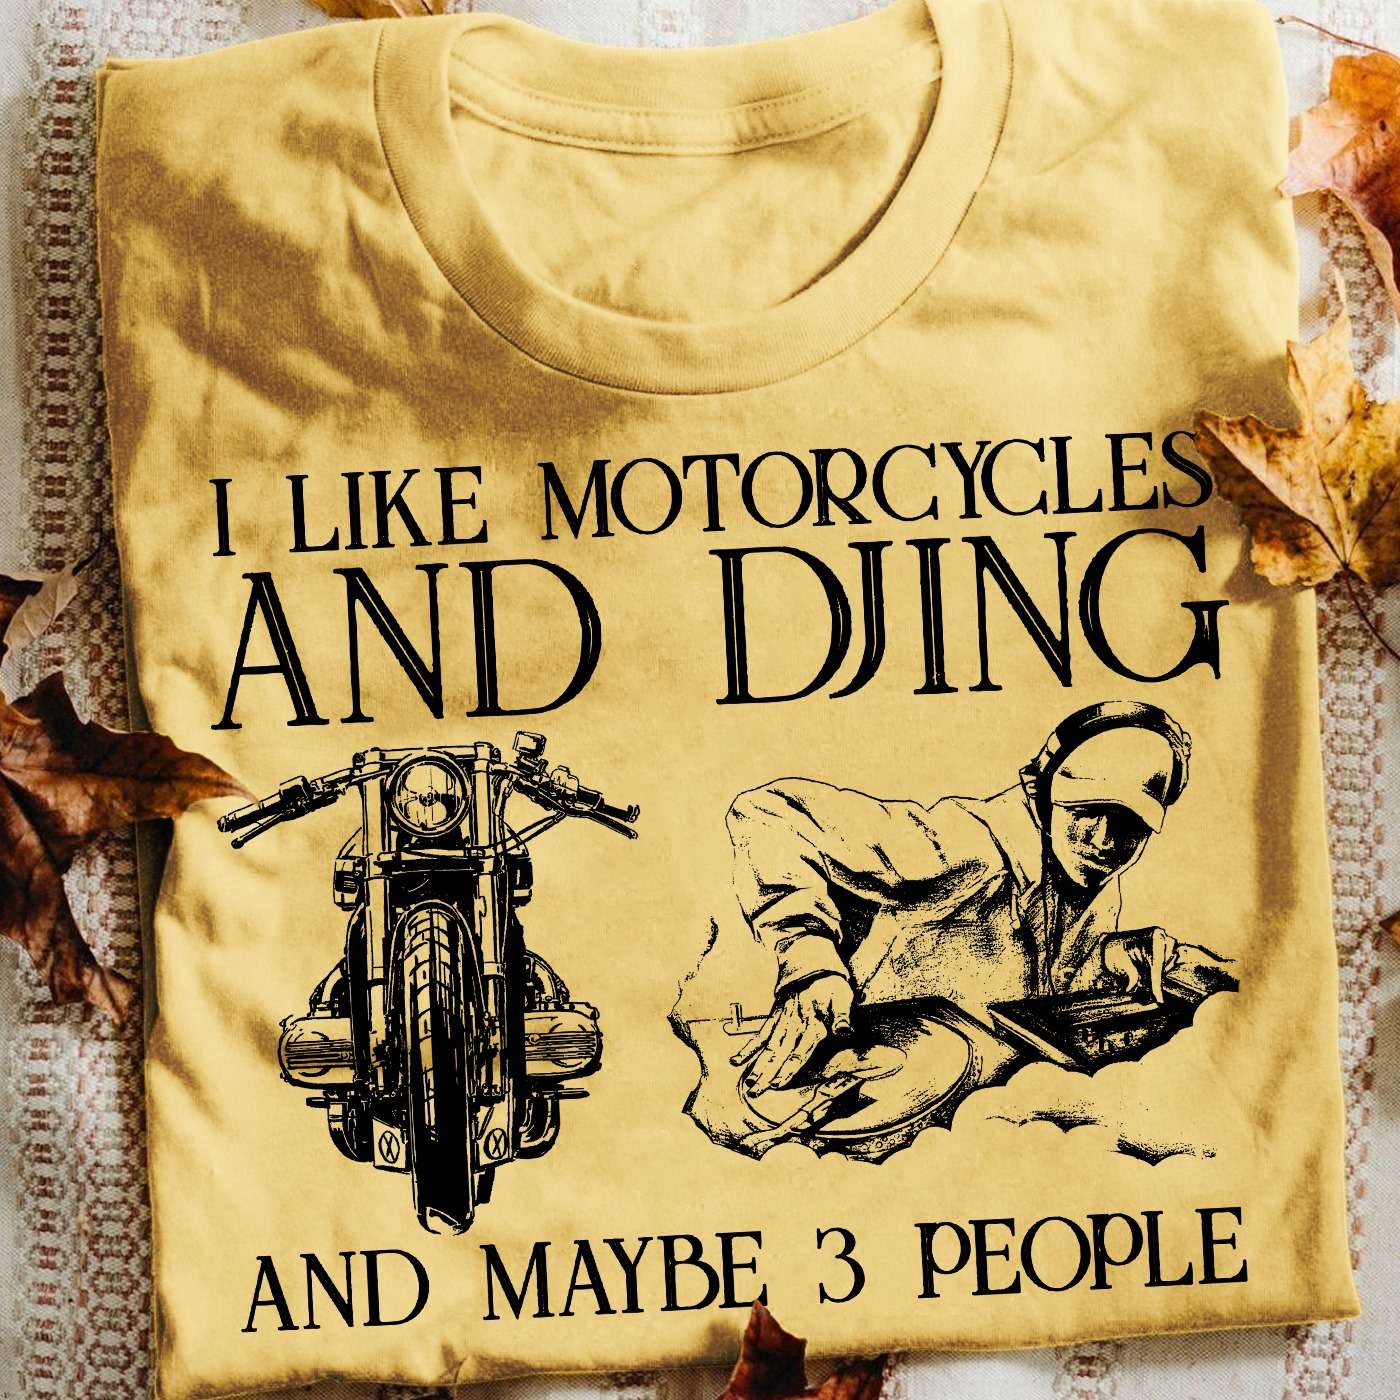 I like motorcycles and djing and maybe 3 people - DJ the music